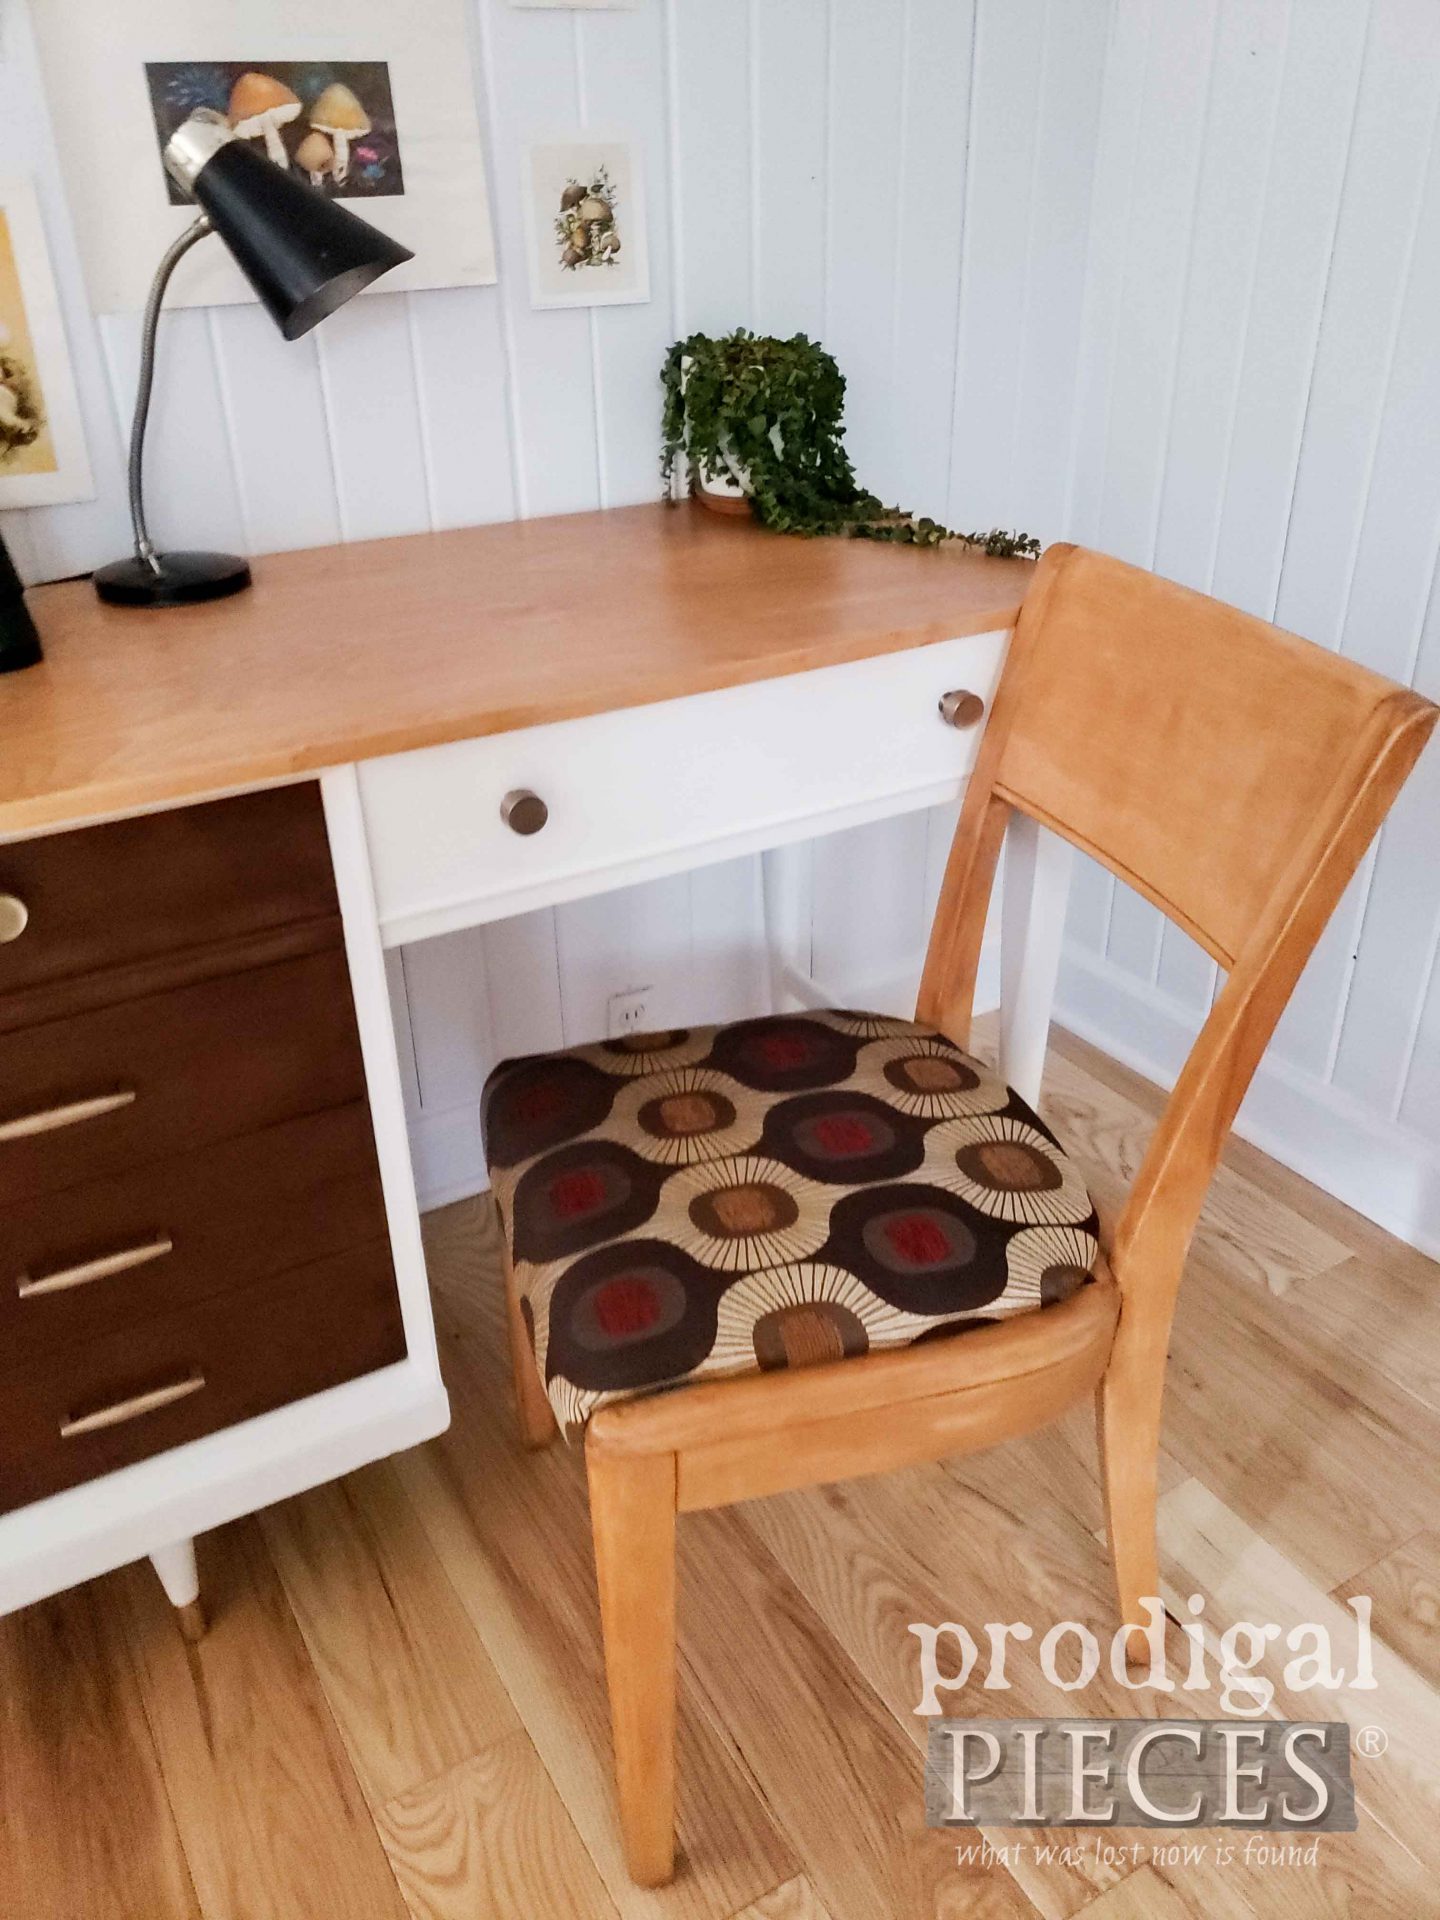 Upholstered Heywood Wakefield Desk Chair by Larissa of Prodigal Pieces | prodigalpieces.com #prodigalpieces #midcentury #furniture #vintage #retro #home #homedecor